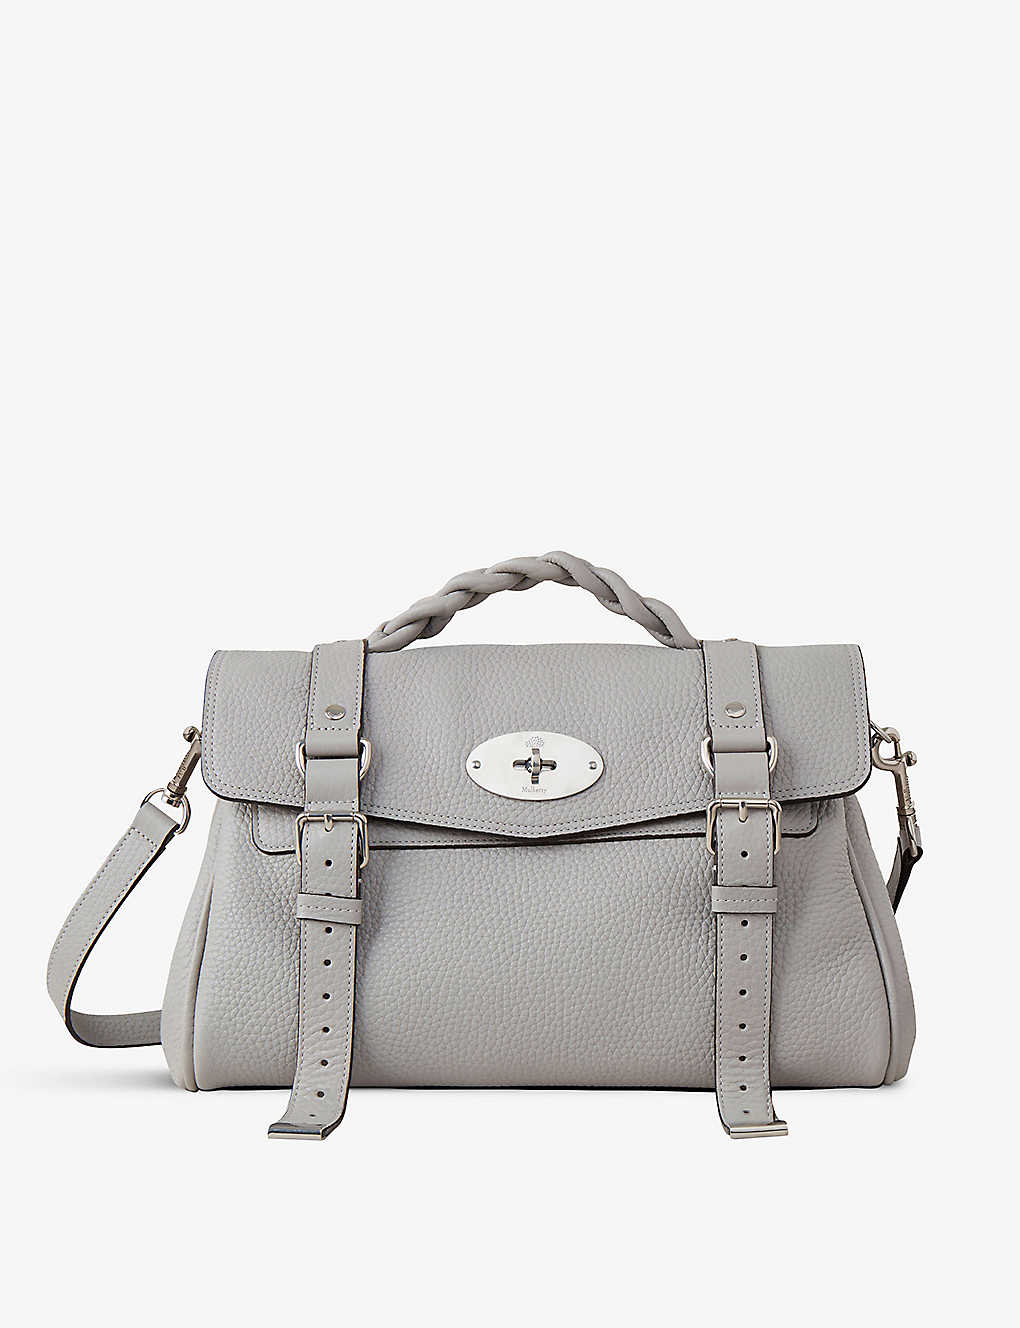 MULBERRY MULBERRY WOMEN'S PALE GREY ALEXA LEATHER SATCHEL BAG,66549964